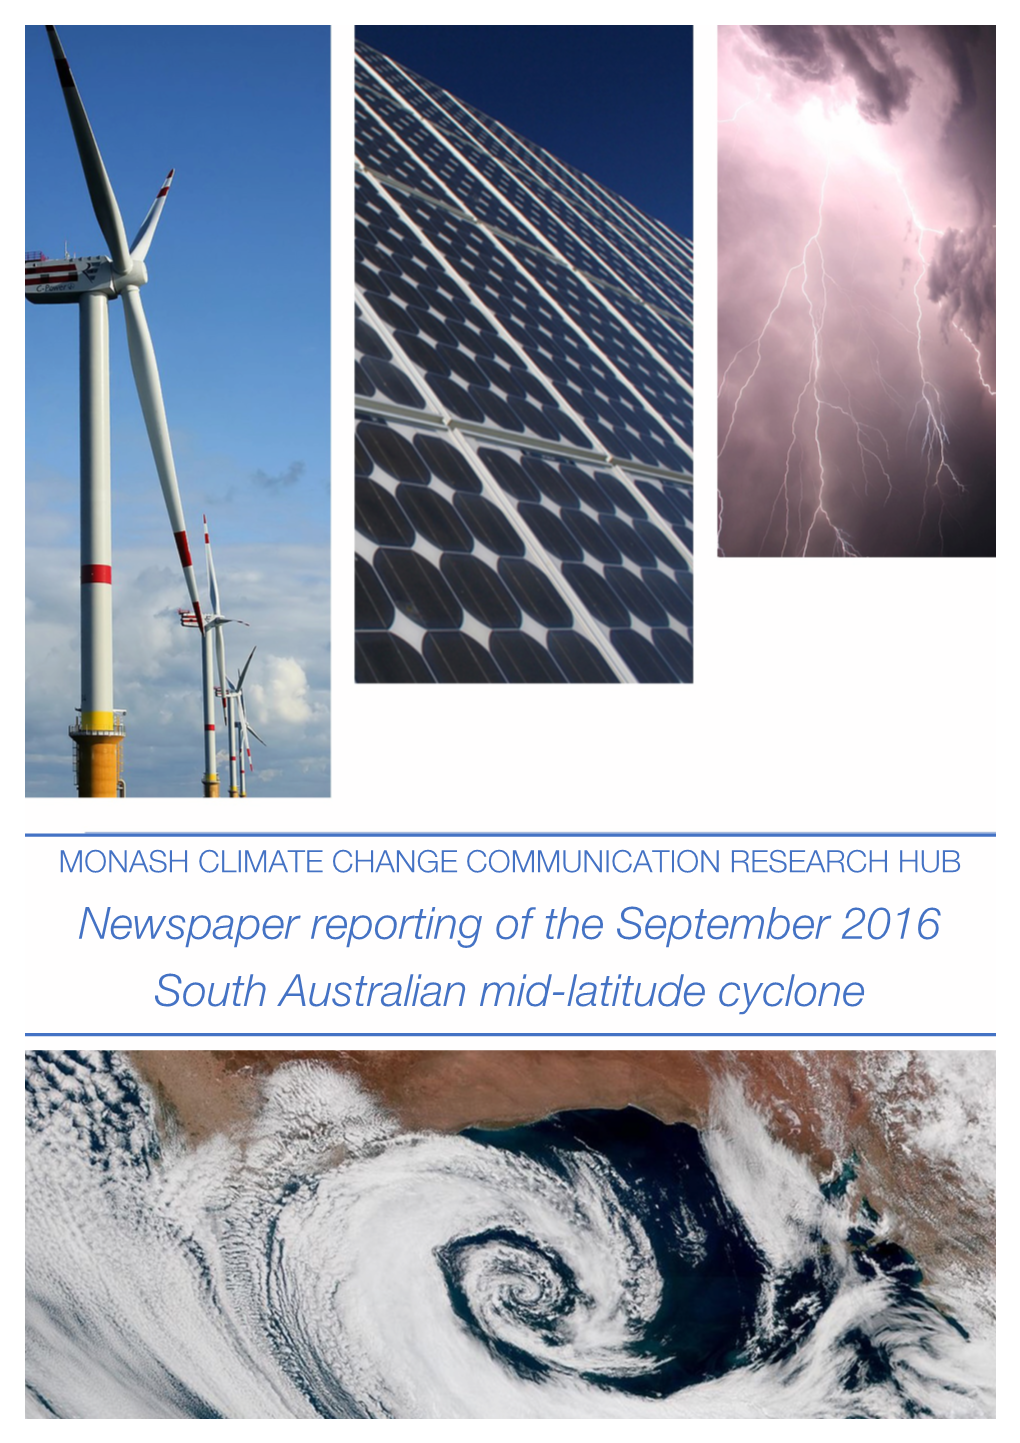 Newspaper Reporting of the September 2016 South Australian Mid-Latitude Cyclone